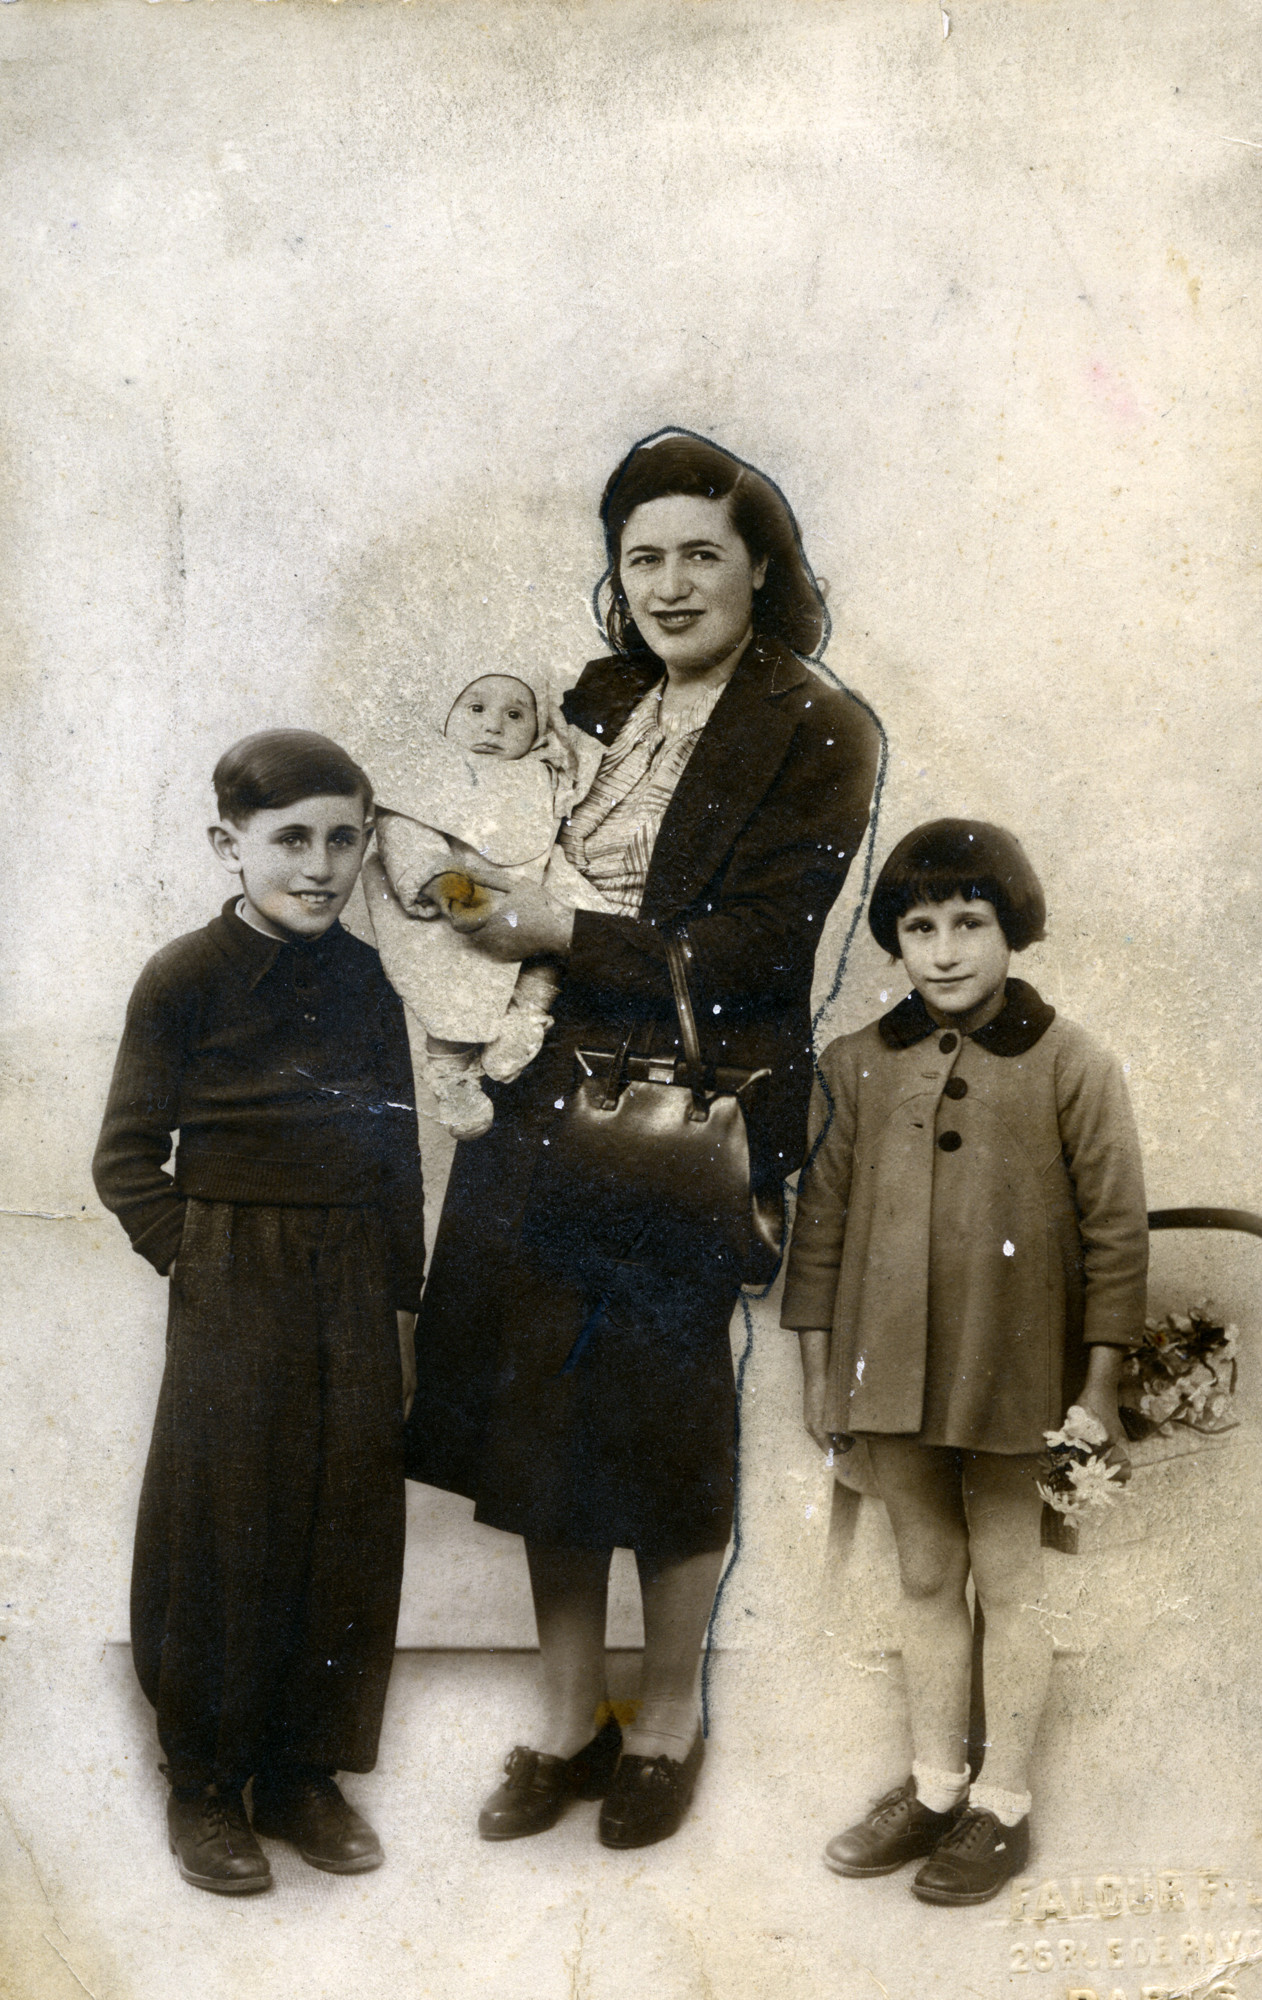 Photograph of a French Jewish family, taken to send to the father while he was imprisoned in Pithiviers. 

Pictured are Claire Flantzer and her children (left to right): Gilbert, Pierre, and Solange.  The photograph was to send to Leon Flantzer.